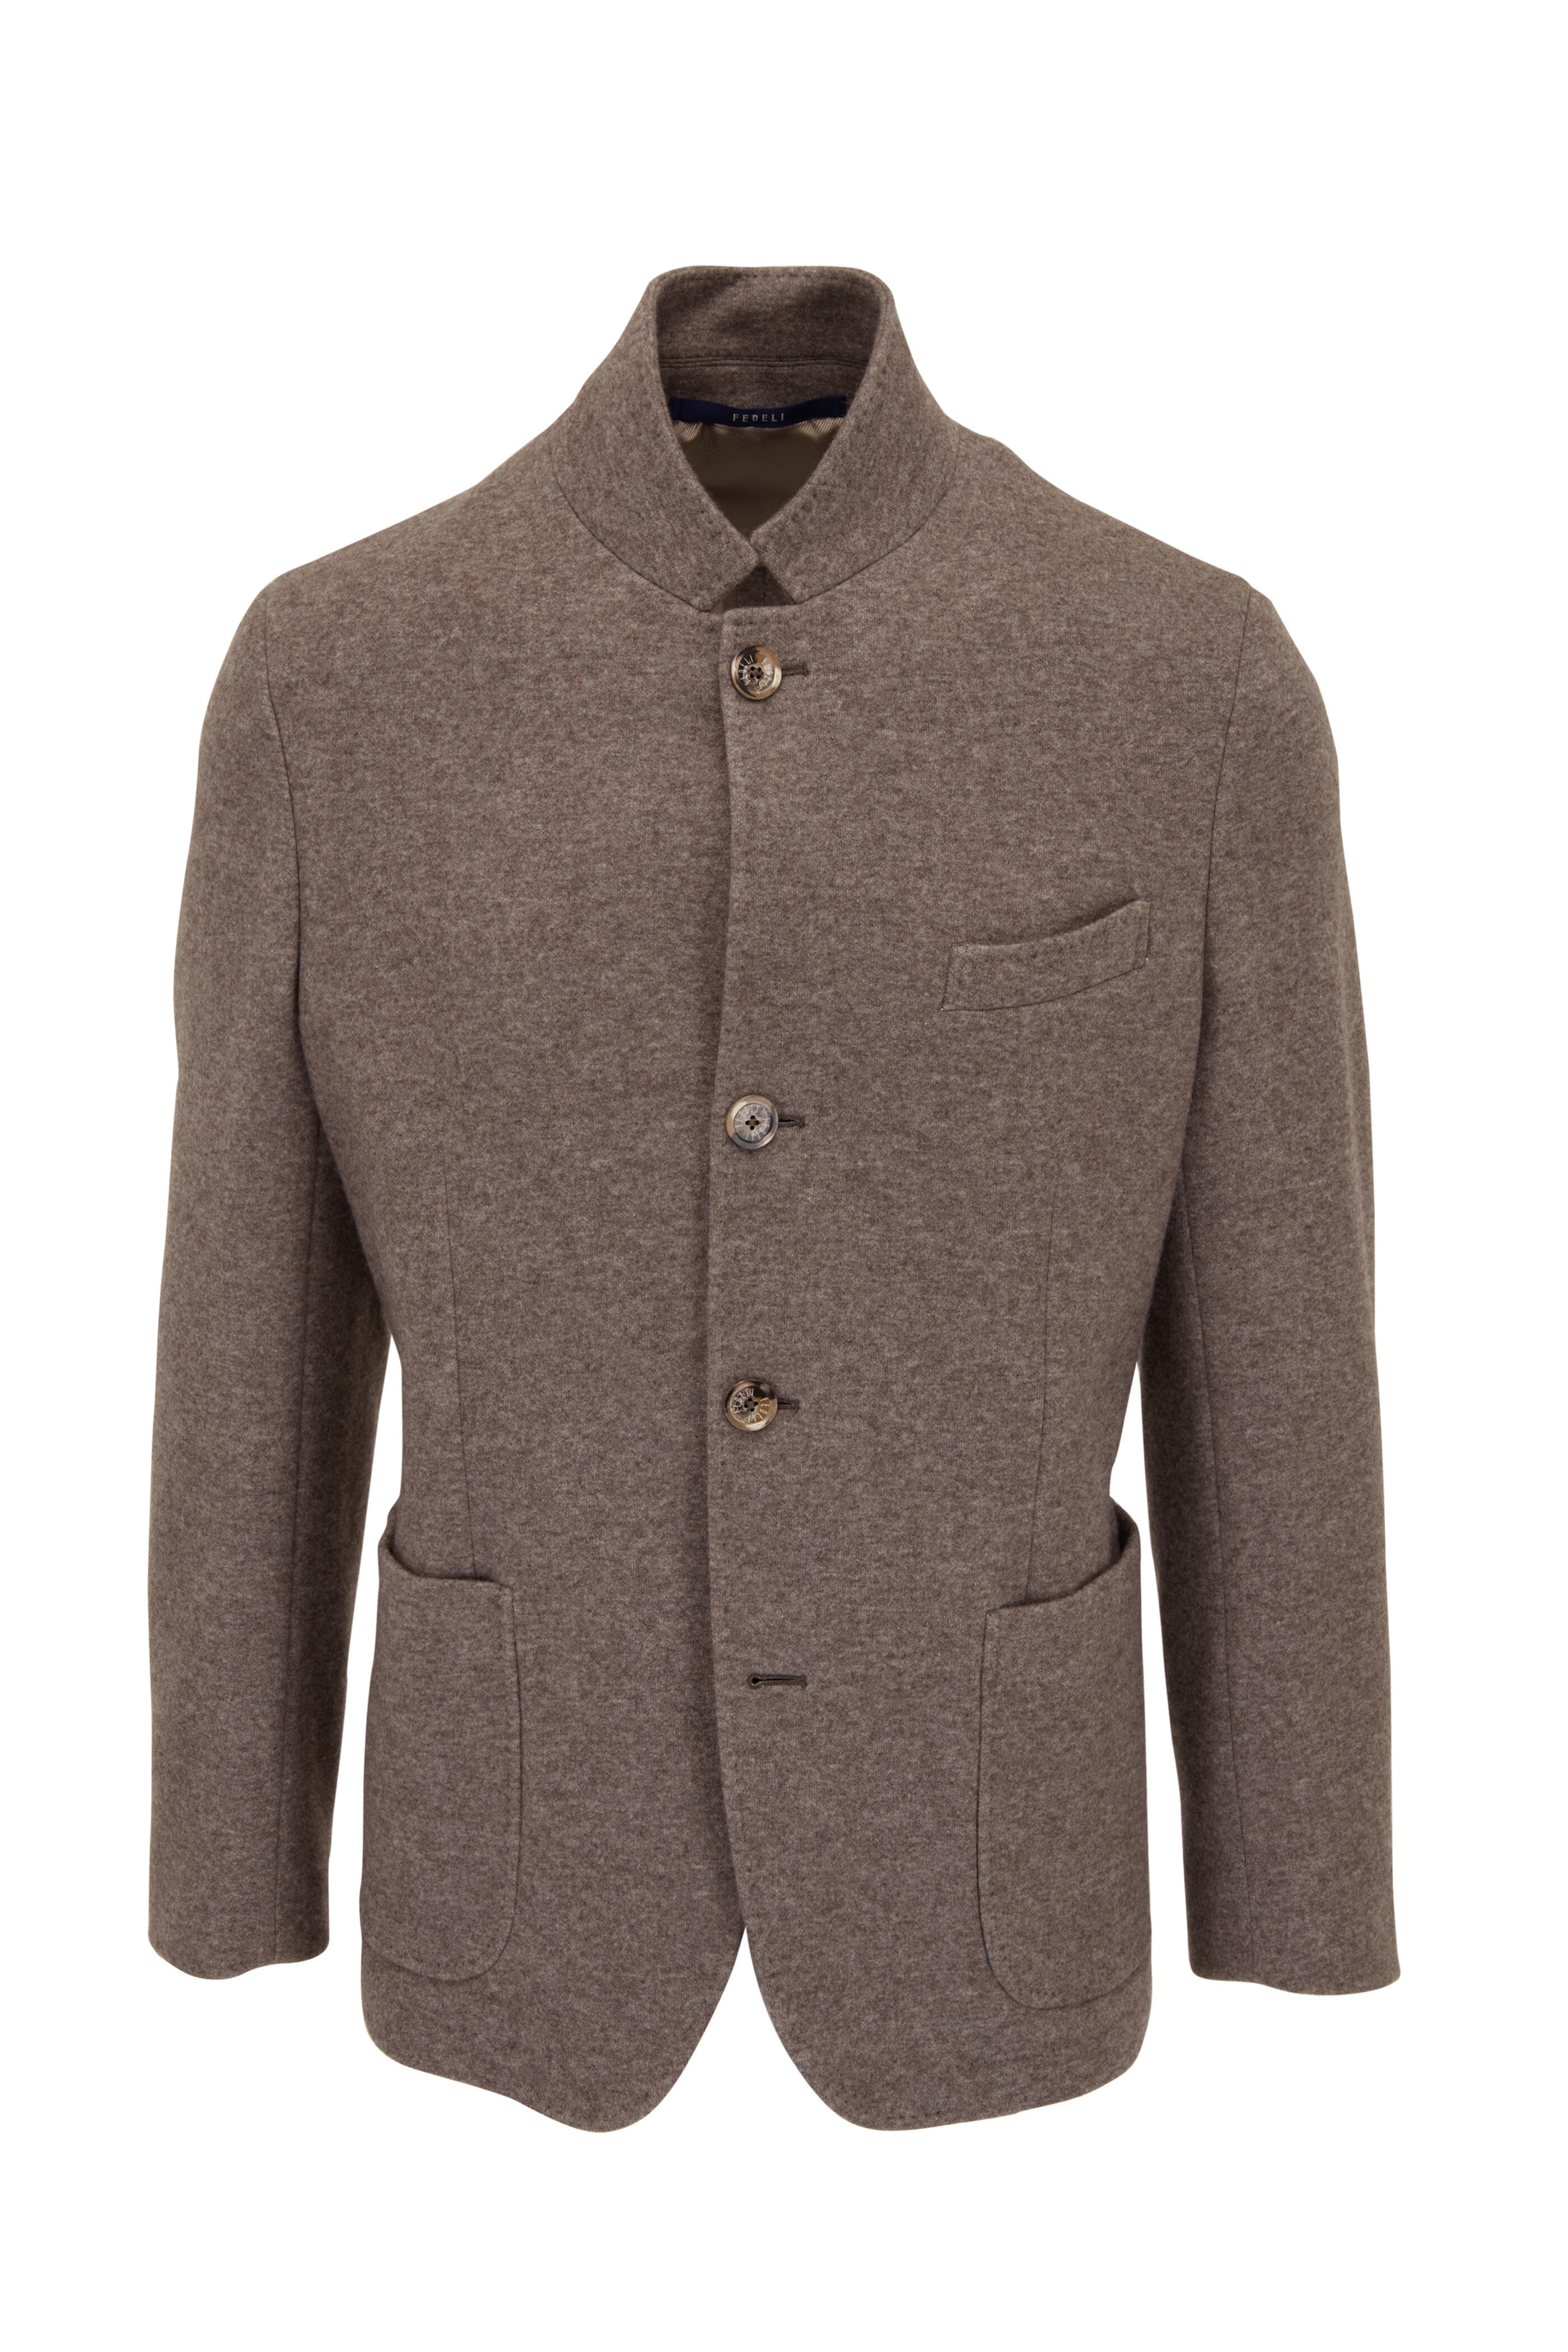 Fedeli - Taupe Cashmere Jacket | Mitchell Stores